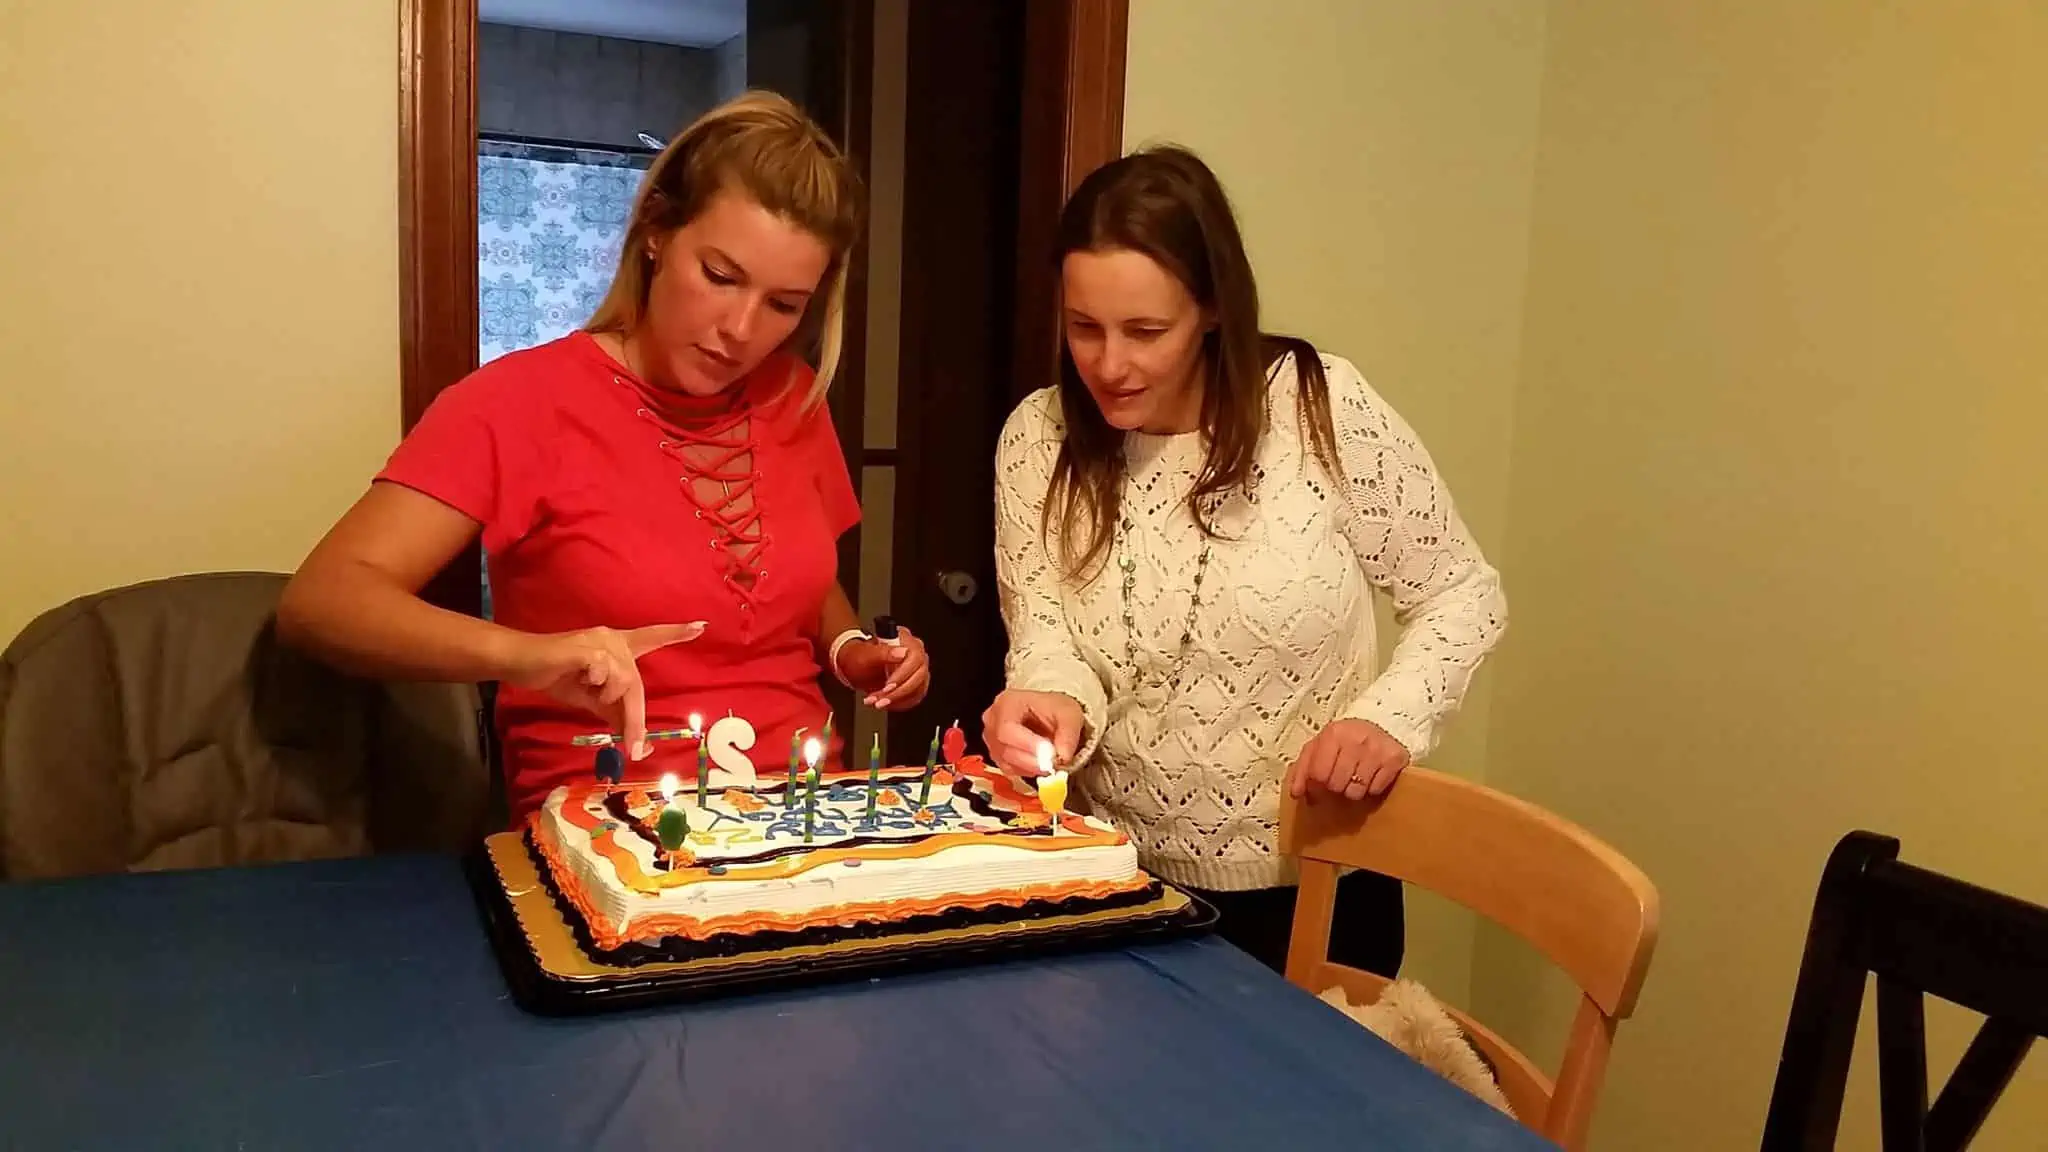 A small group of women surrounding a birthday cake.